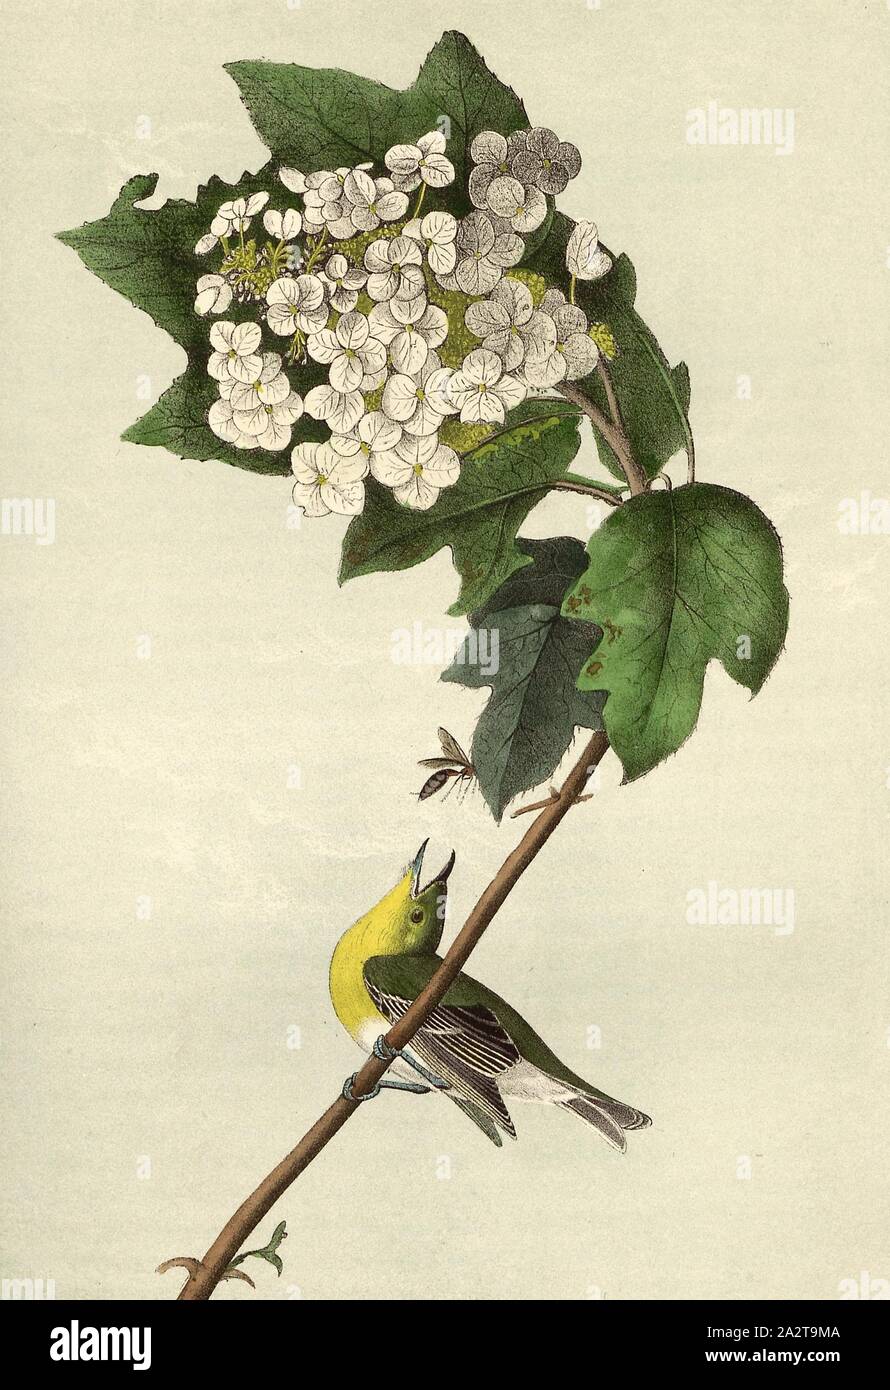 Yellow-throated Vireo, or Greenlet - Swamp Snowball Hydrangea quercifolia, Yellow-throated Vireo (Vireo flavifrons), Oak-leaved Hydrangea (Hydrangea quercifolia), Signed: J.J. Audubon, J.T. Bowen, lithograph, Pl. 238 (vol. 4), Audubon, John James (drawn); Bowen, J. T. (lith.), 1856, John James Audubon: The birds of America: from drawings made in the United States and their territories. New York: Audubon, 1856 Stock Photo